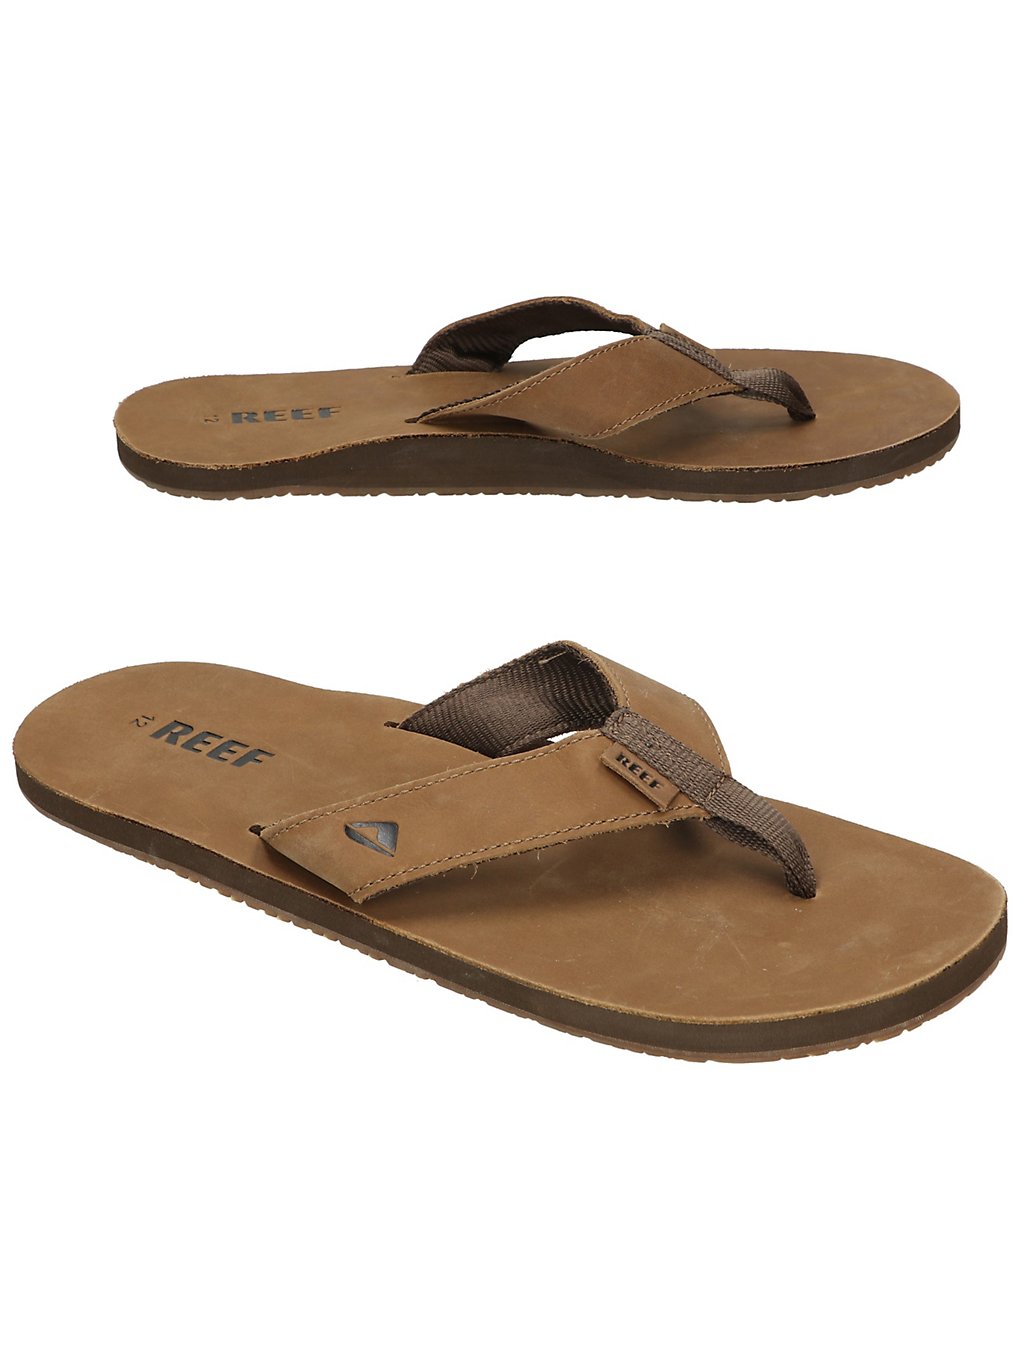 Reef leather smoothy sandals ruskea, reef